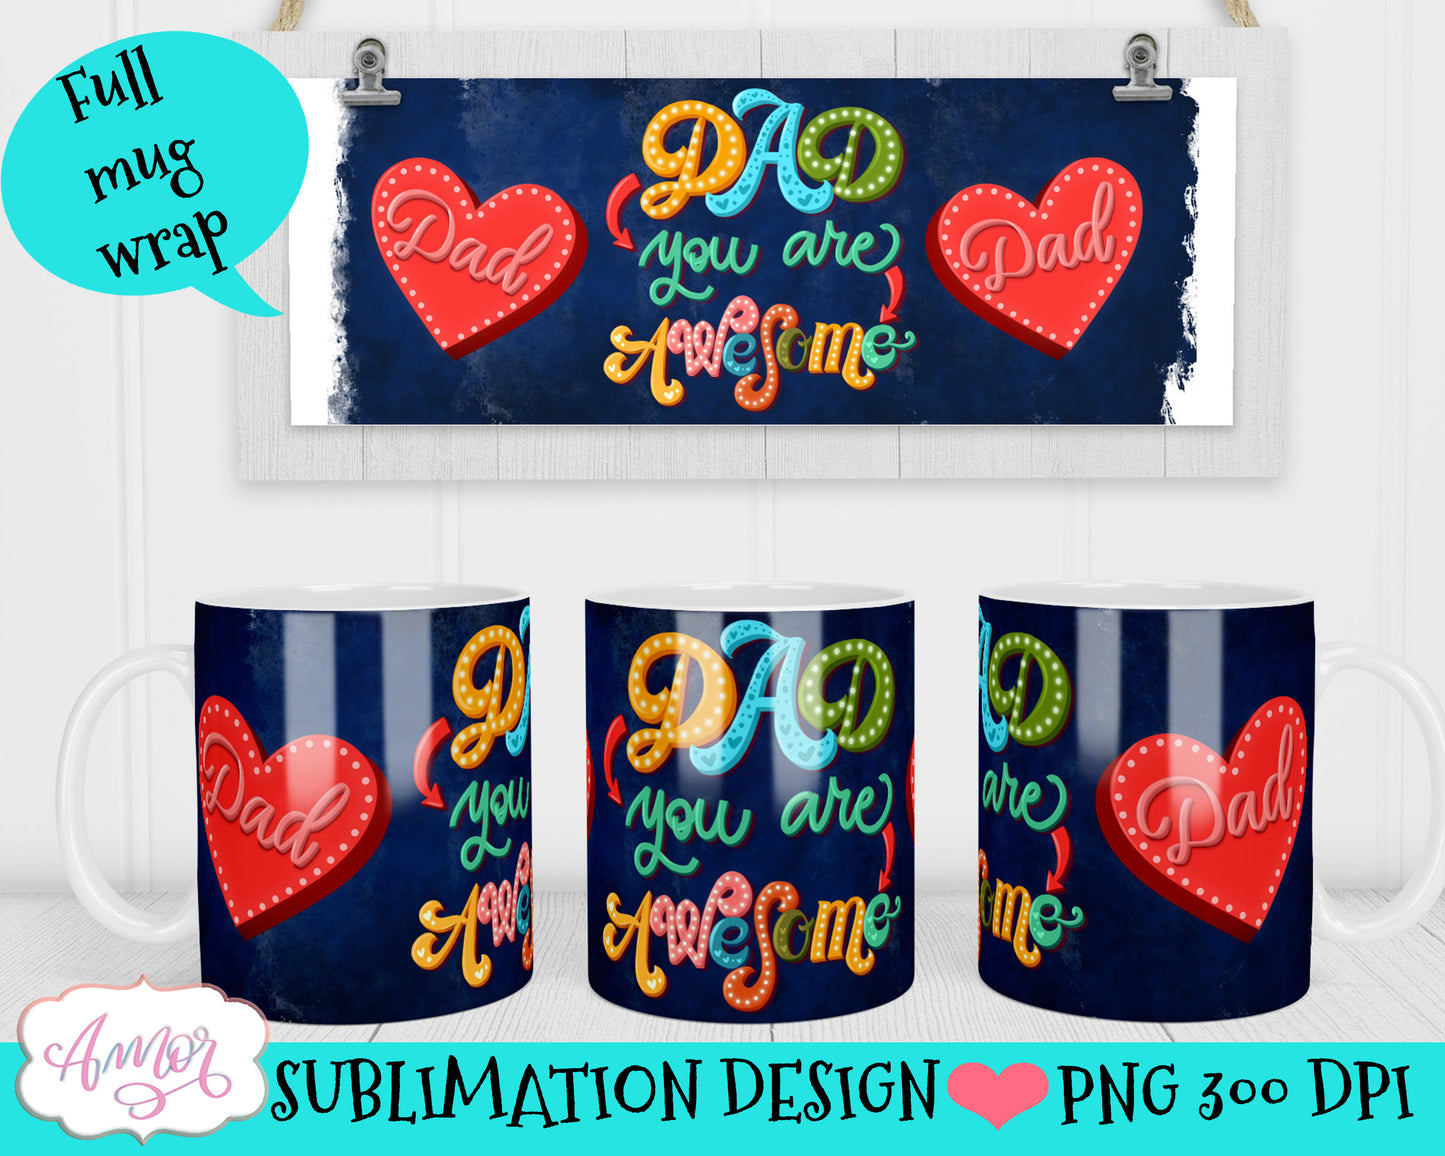 Photo mug wrap sublimation design for Father's day gift